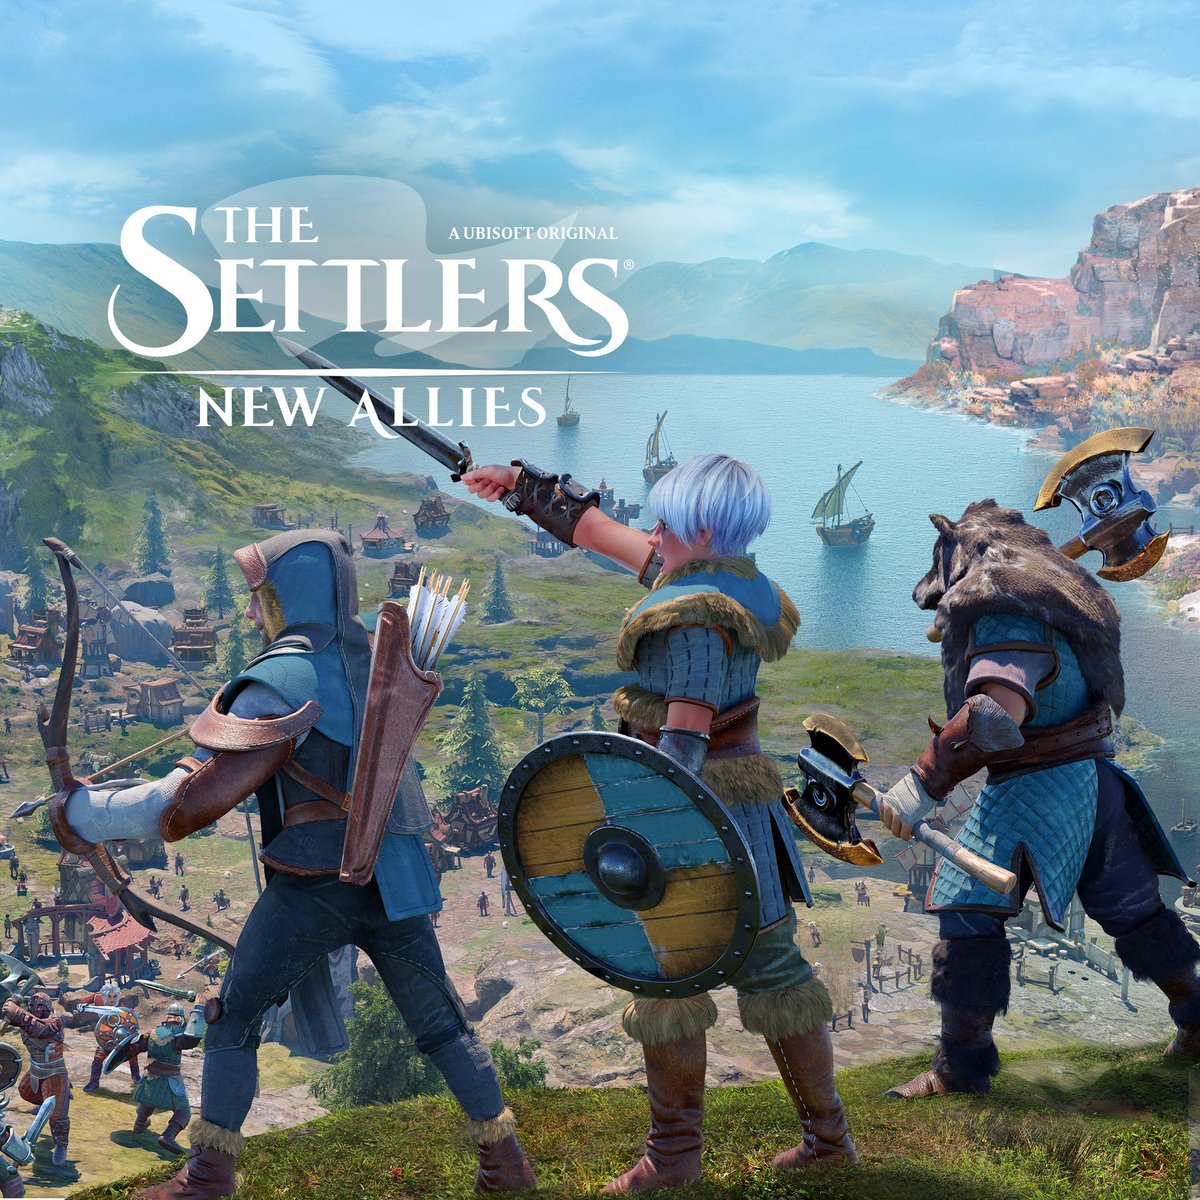 The Settlers®: New Allies (Xbox): July 4